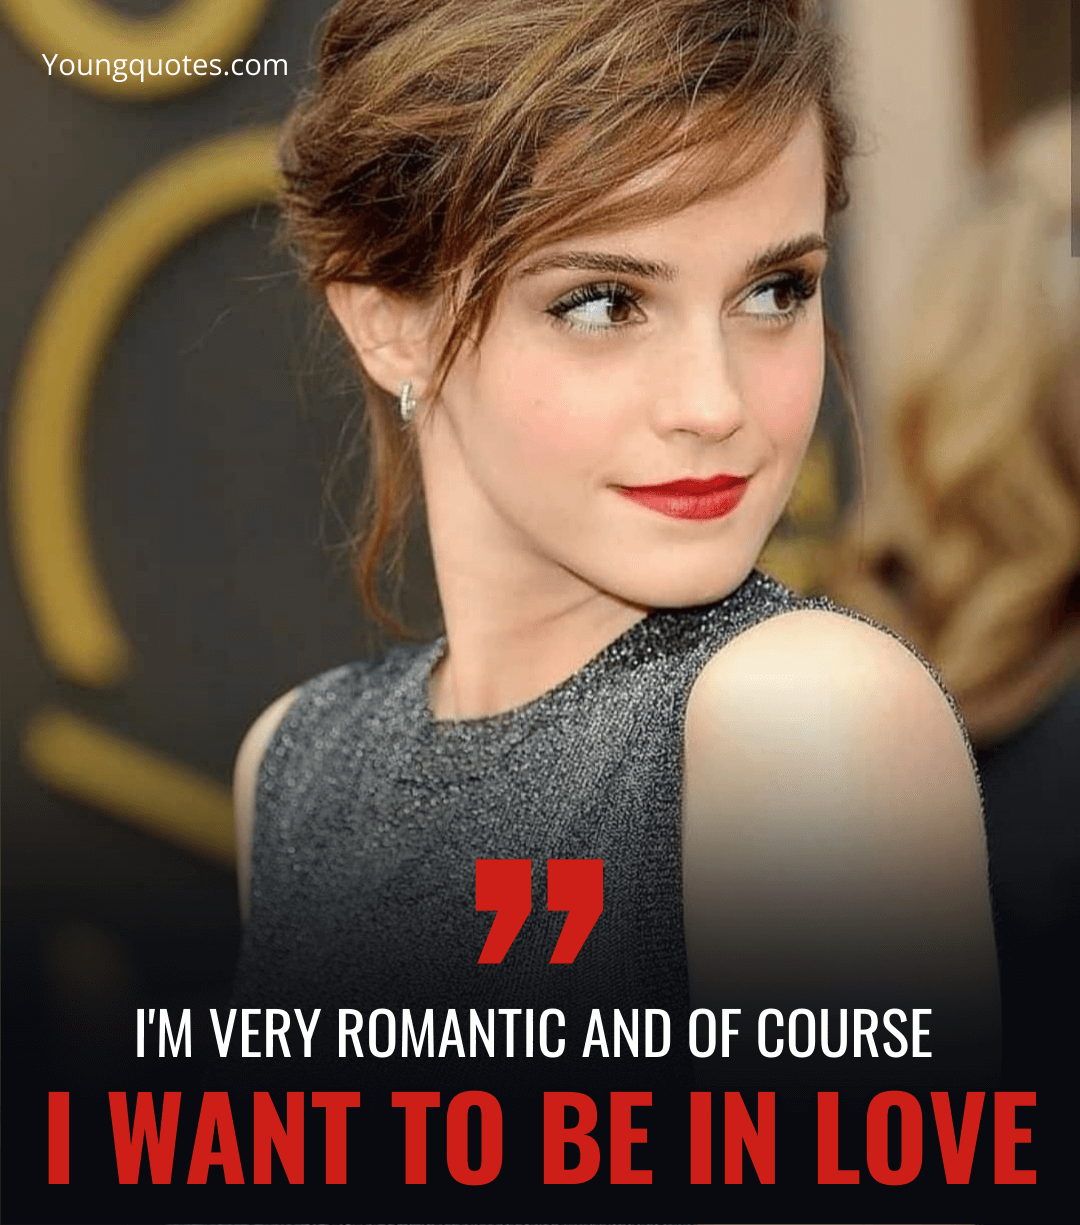 I'm very romantic and of course I want to be in love. - emma